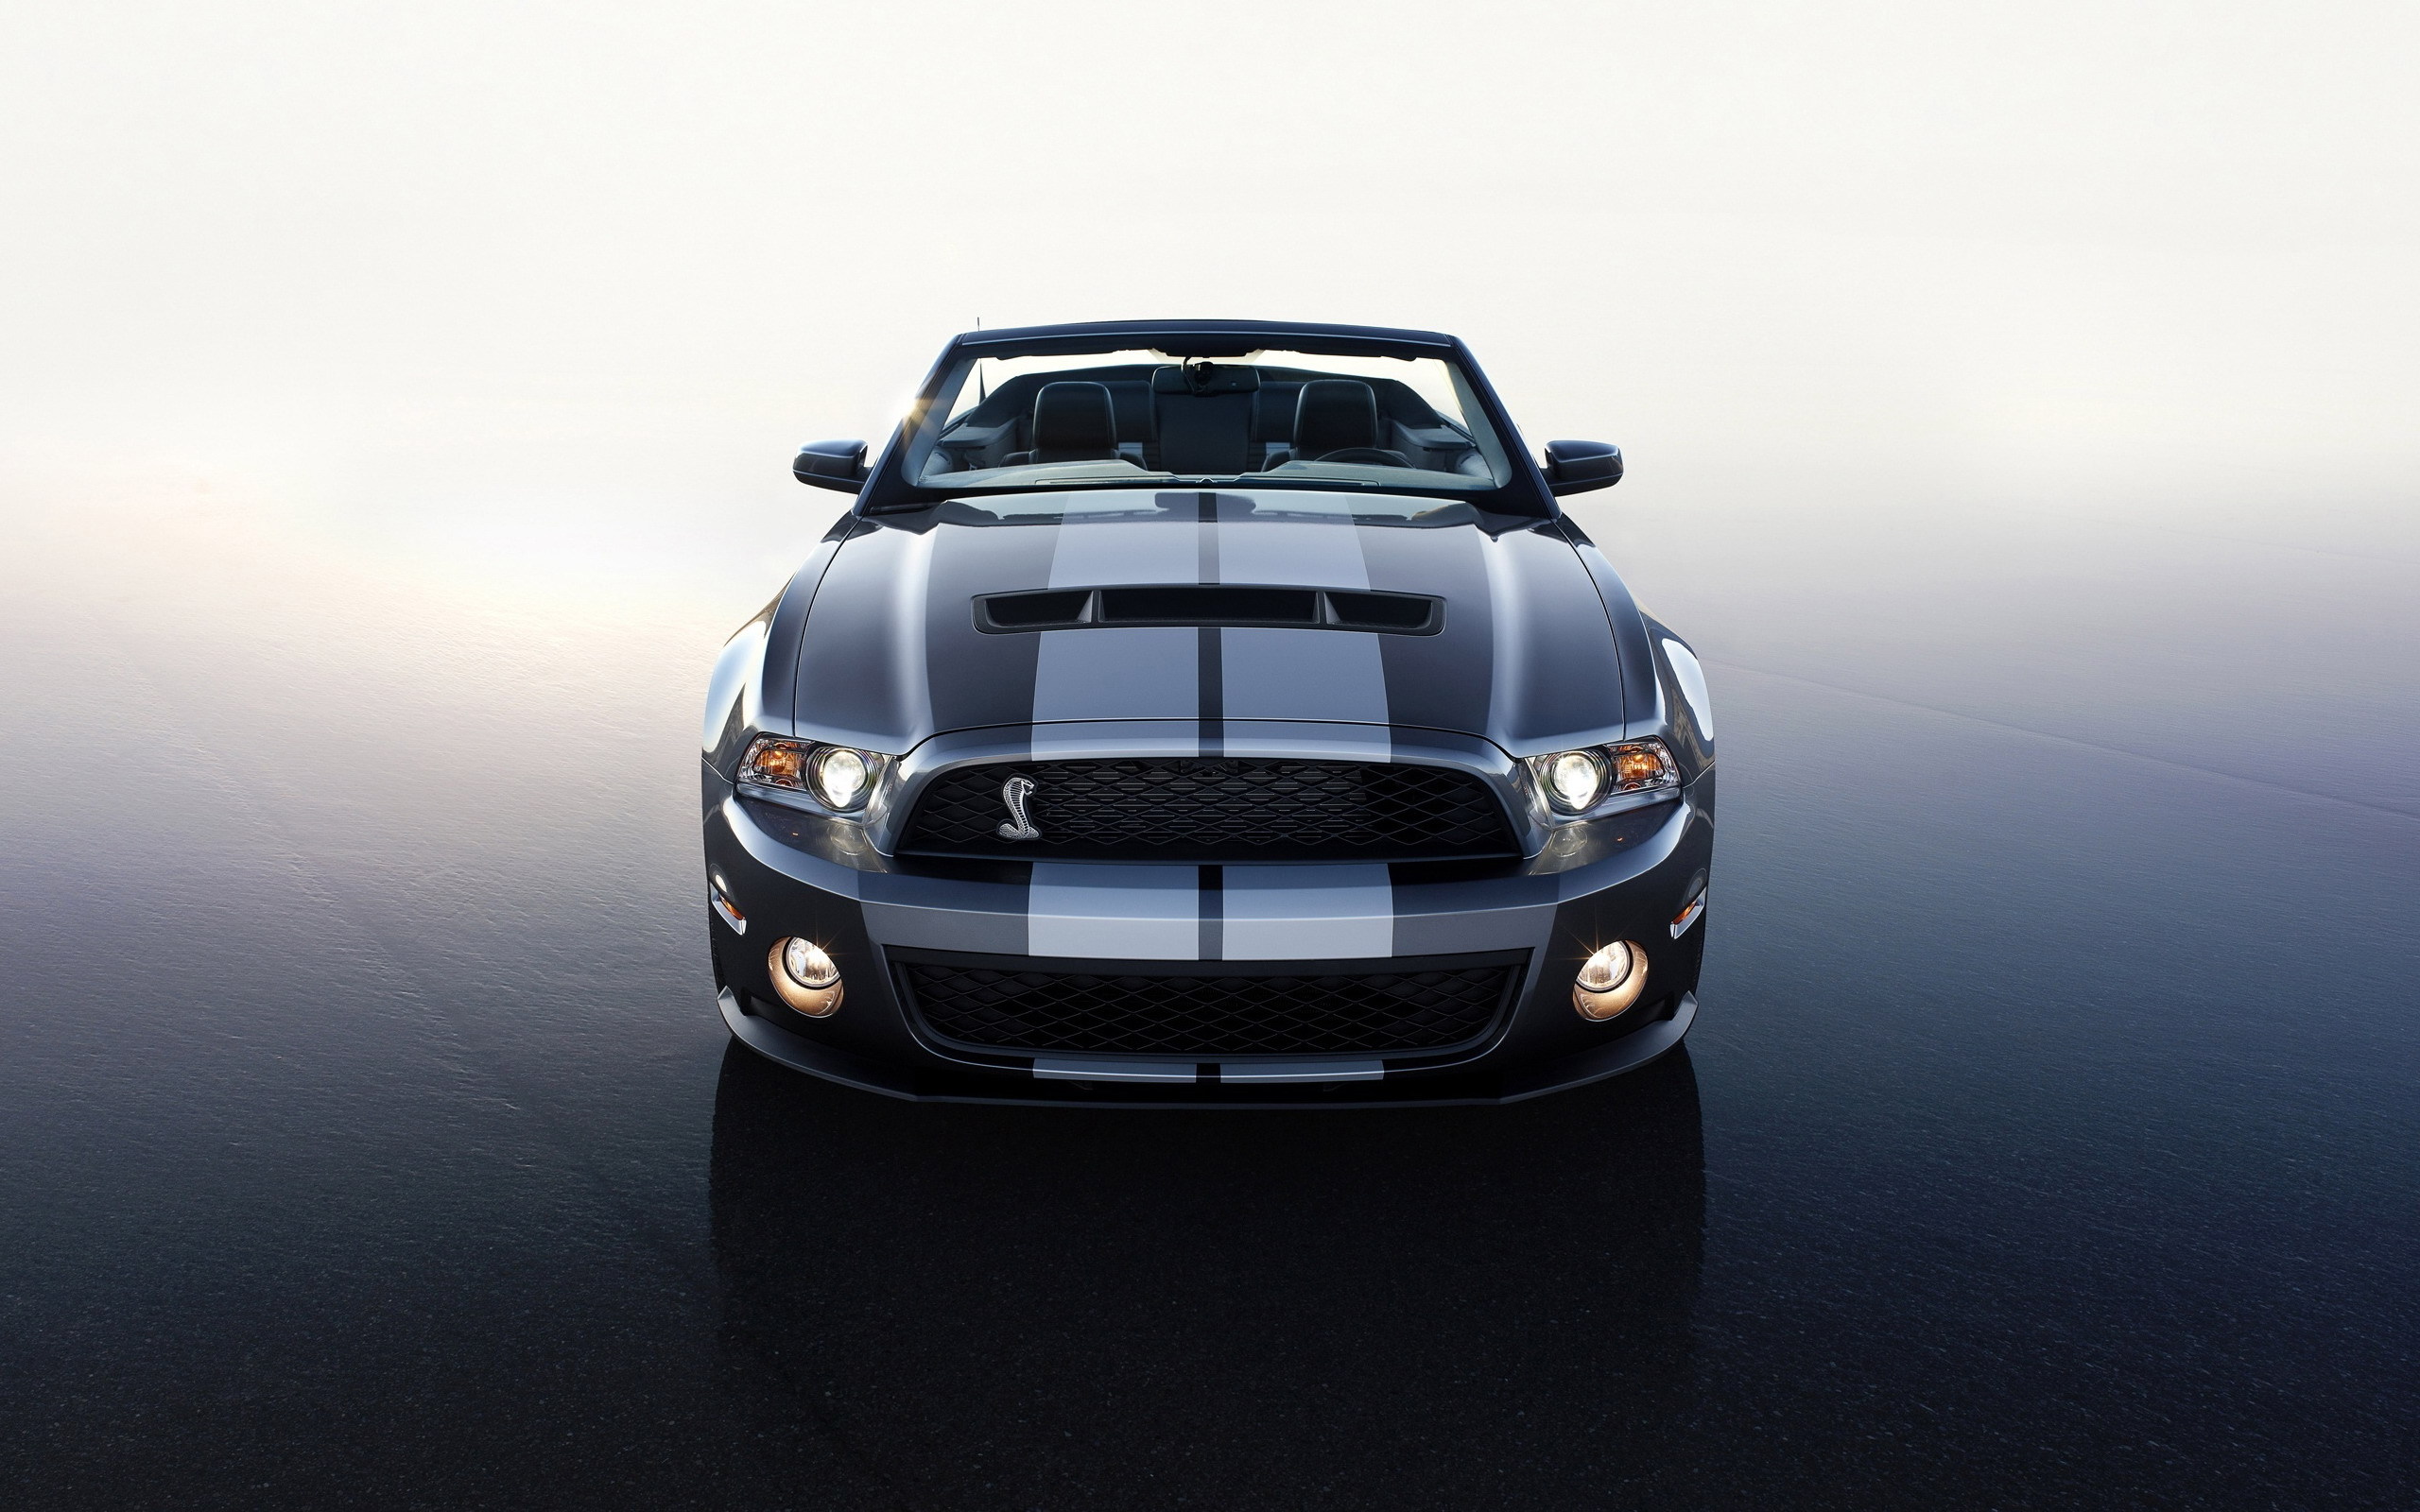 29555 free wallpaper 480x800 for phone, download images mustang, auto, transport 480x800 for mobile